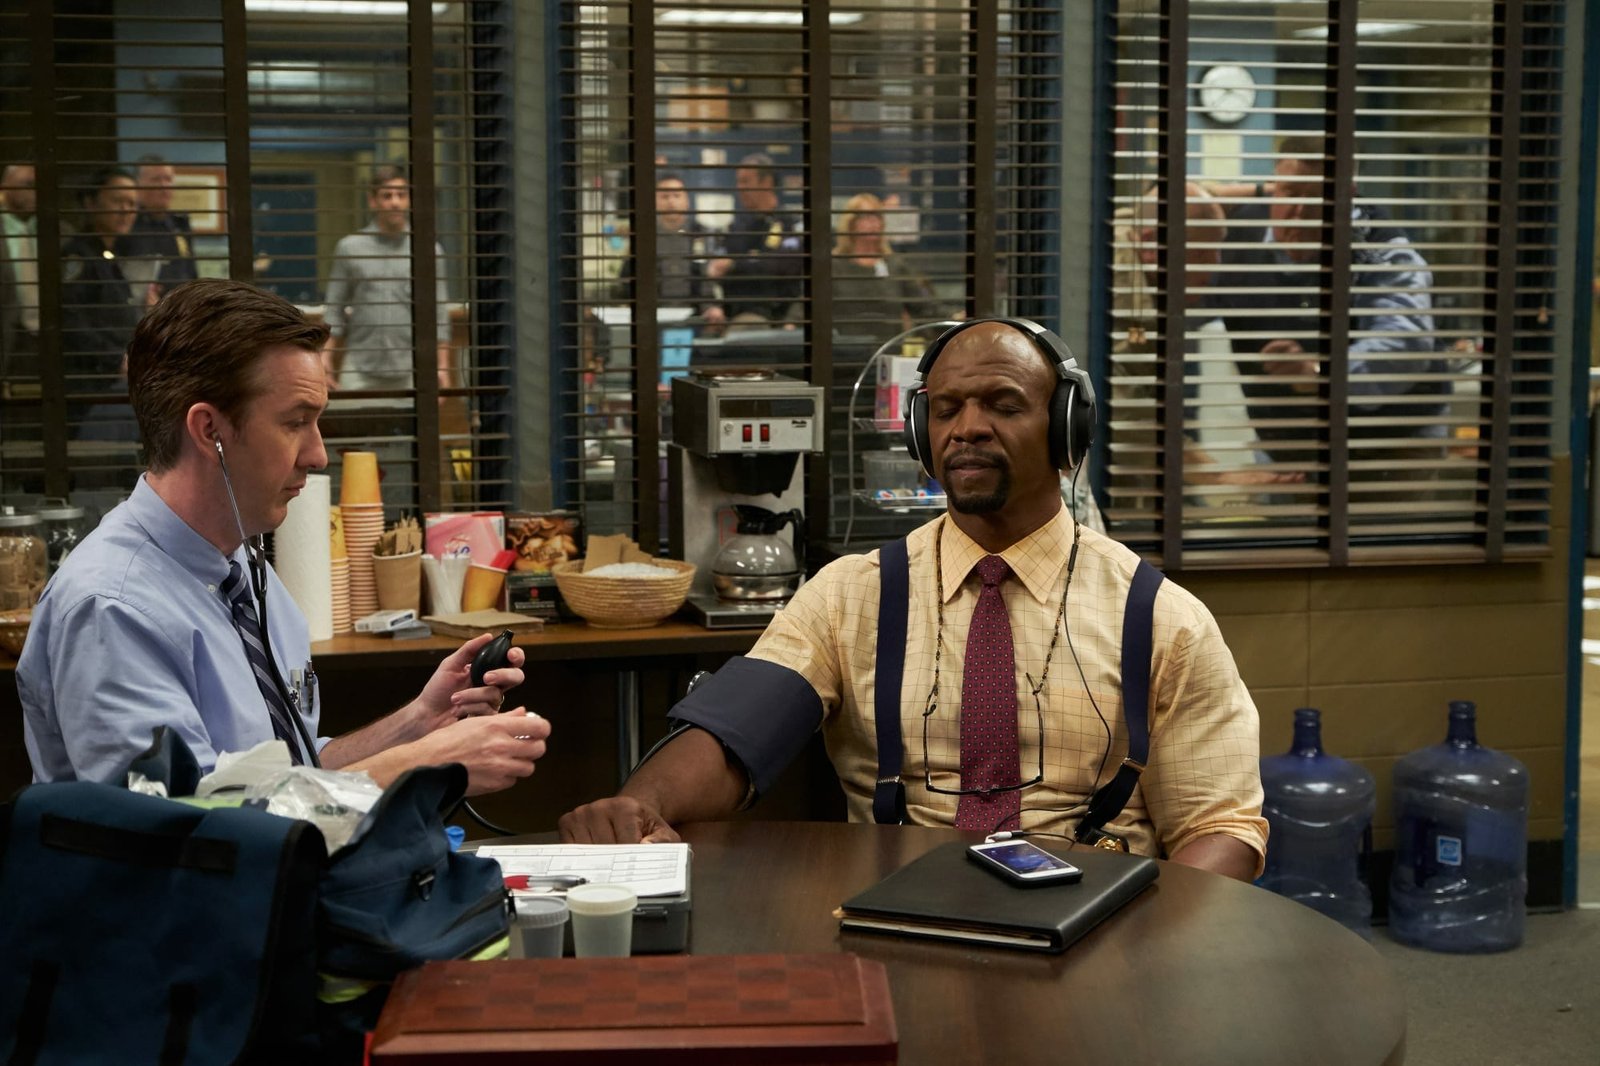 best brooklyn 99 episodes: Show me where I'm going"(SEASON 5, EPISODE 20)